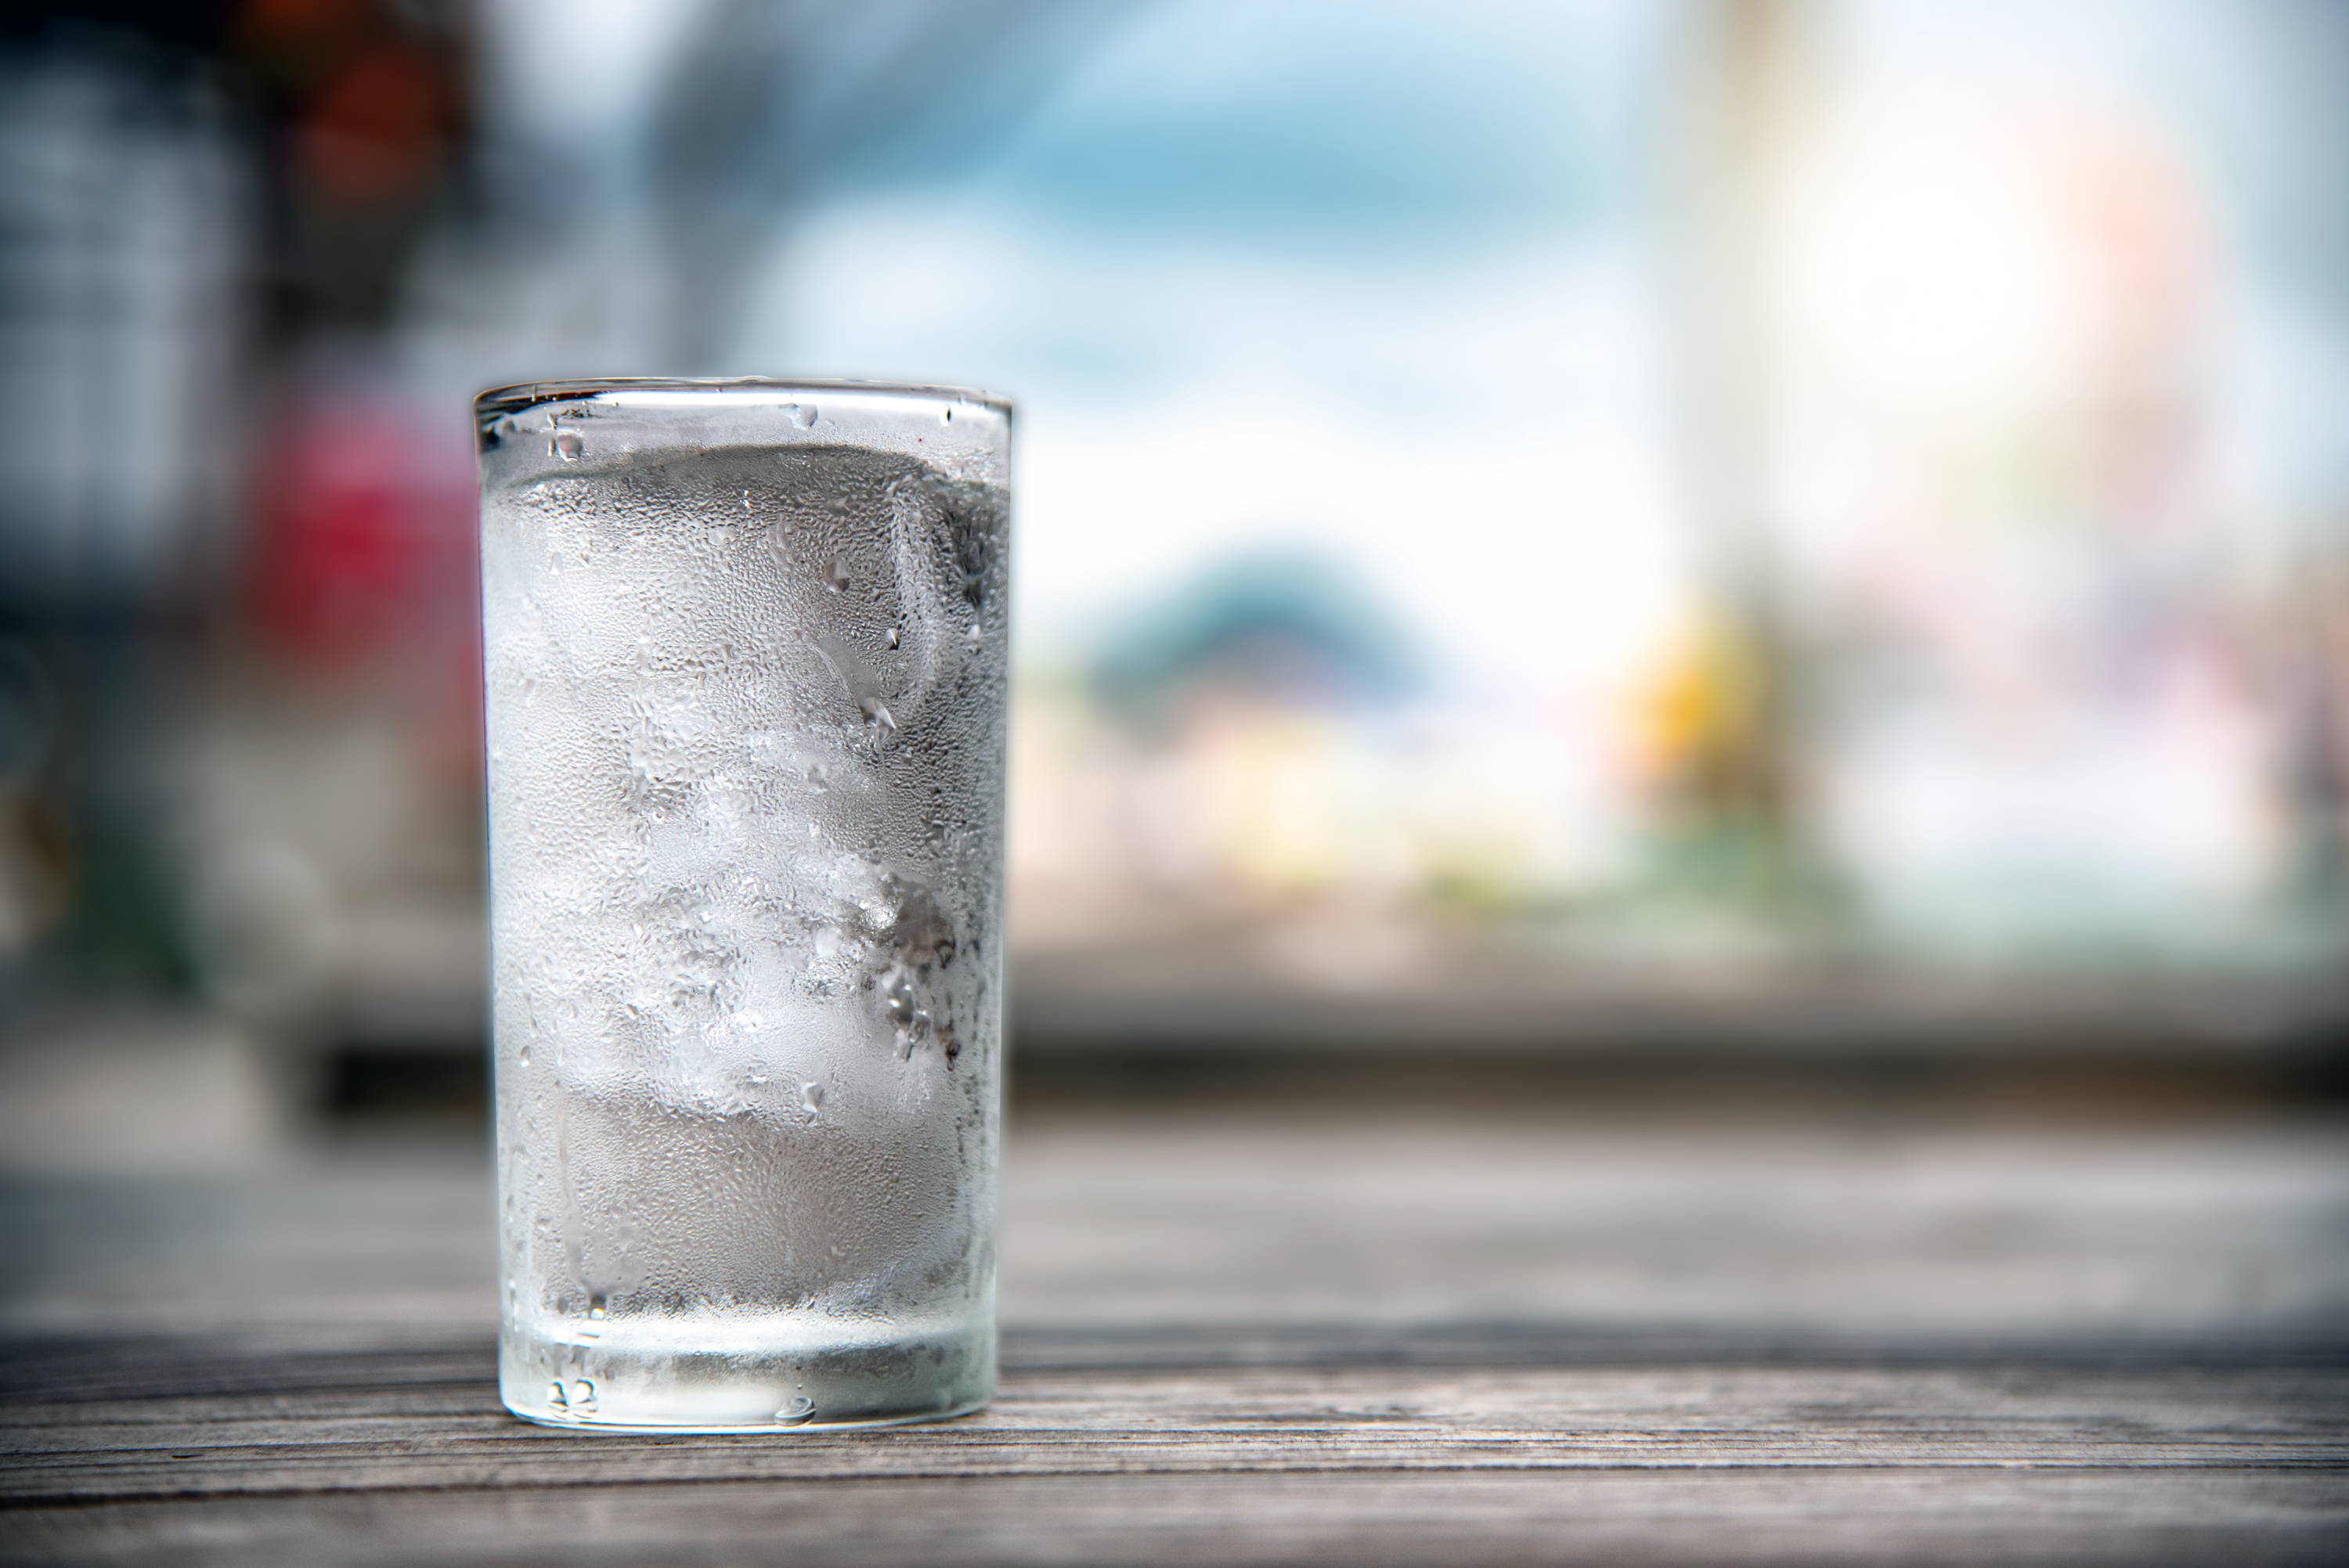 Room Temperature or Ice Cold: How Should You Be Drinking Water